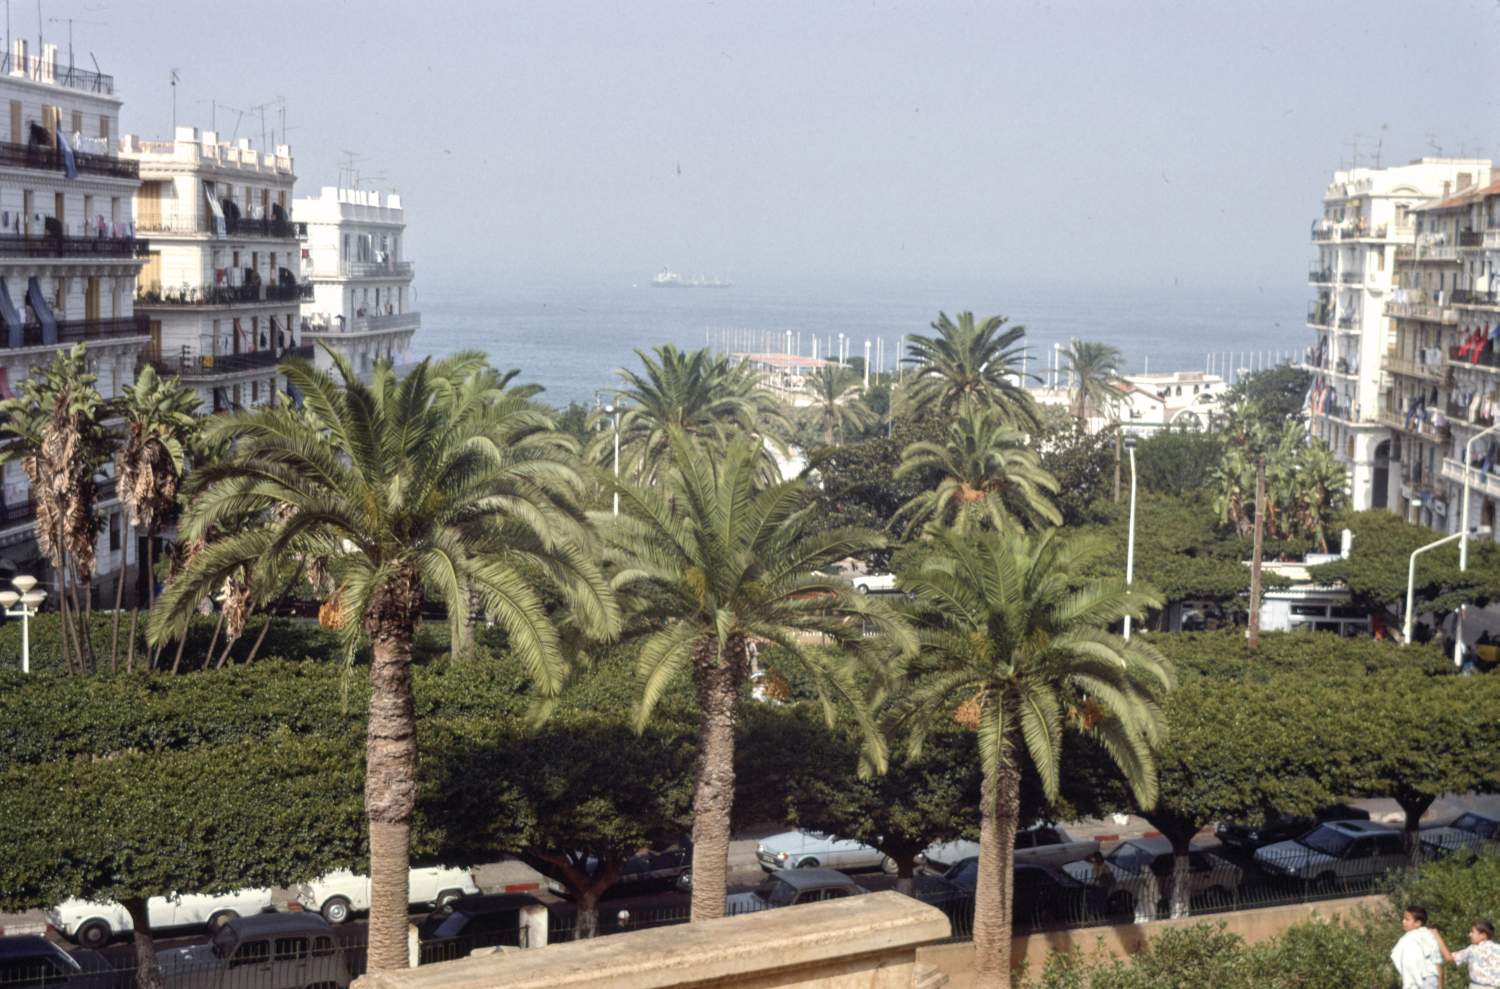 View toward the waterfront from Bab El Oued